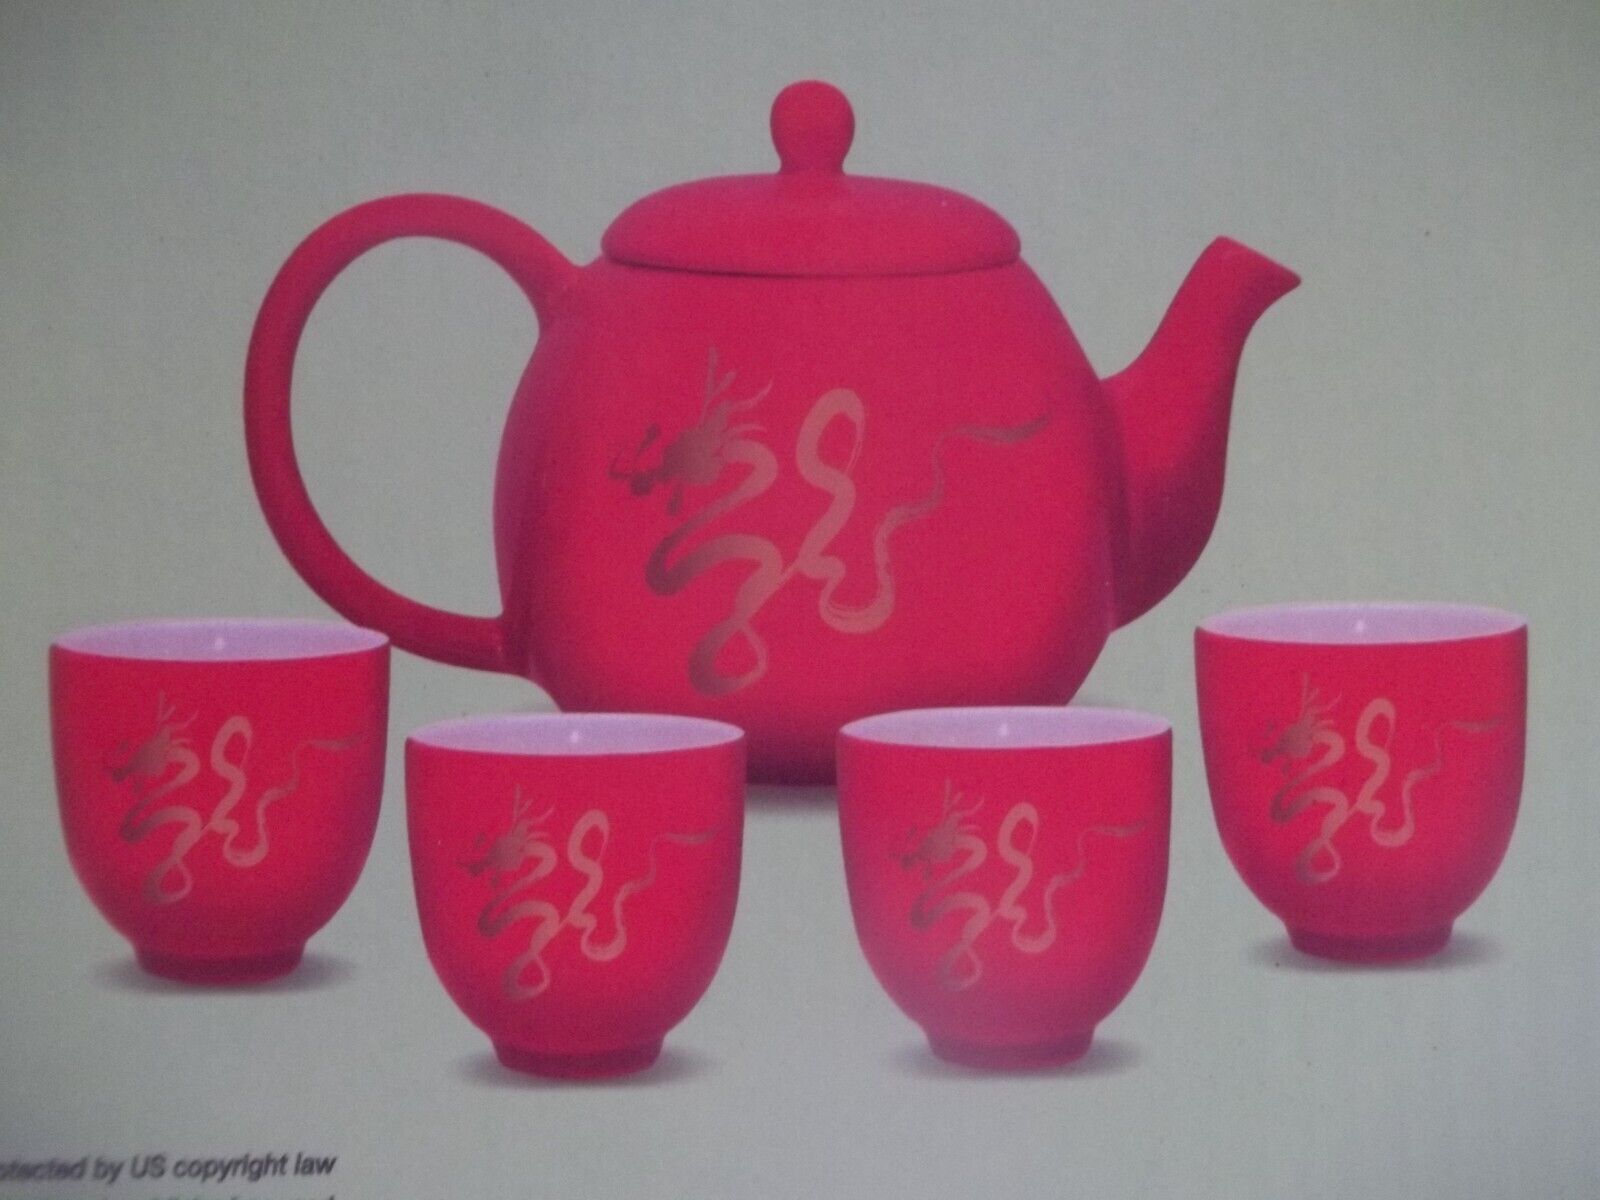 New in Box Benevolence Tea Set for Four with Tea Pot Red w/Golden Dragon Design